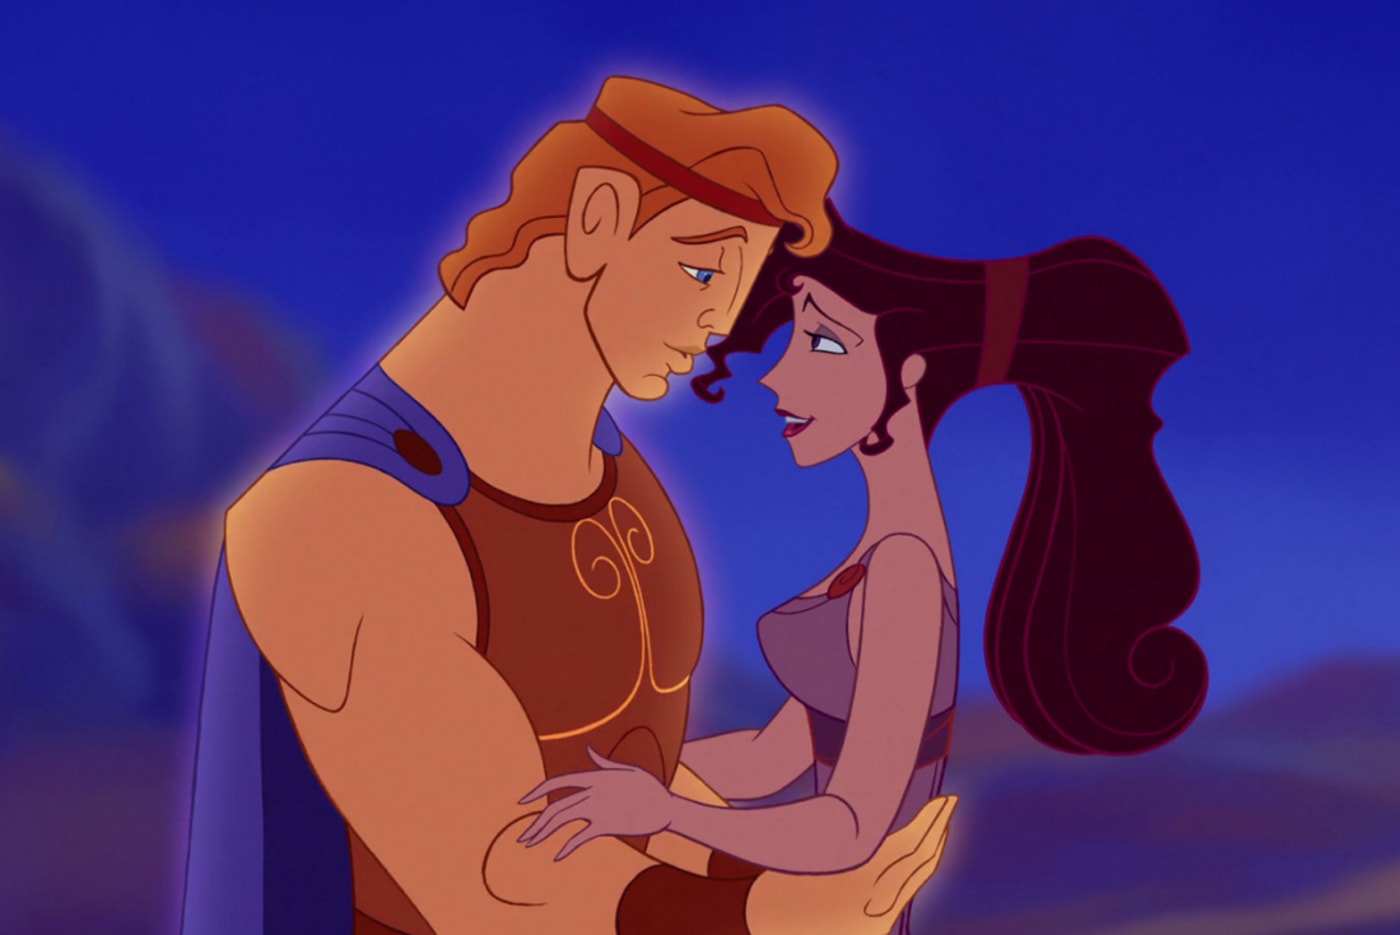 An image from the 1997 animated movie Hercules